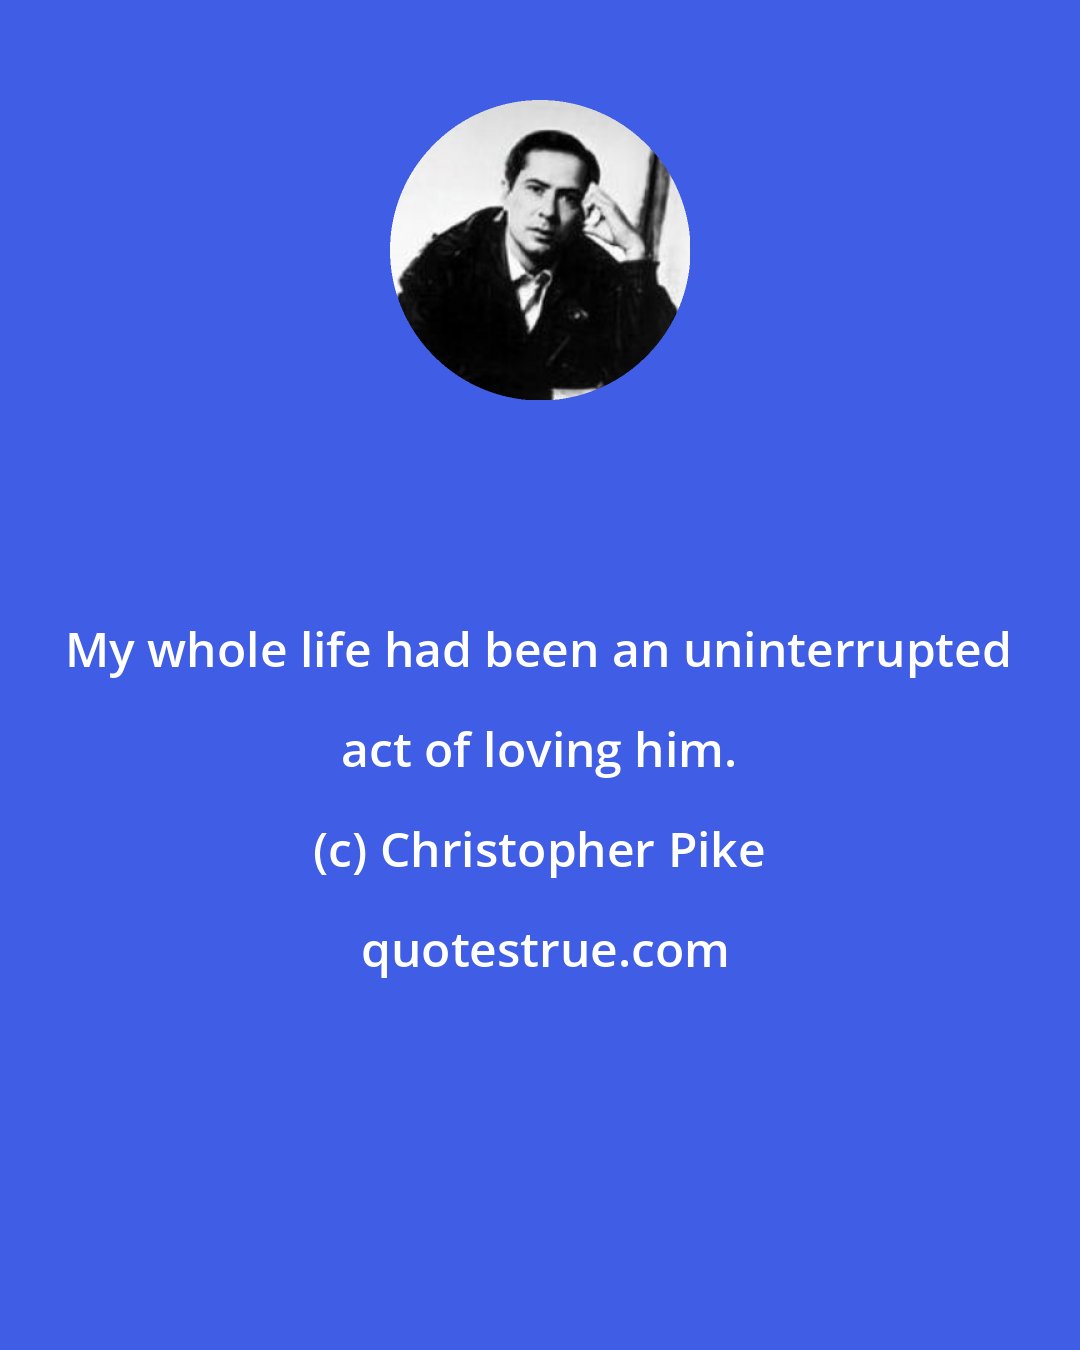 Christopher Pike: My whole life had been an uninterrupted act of loving him.